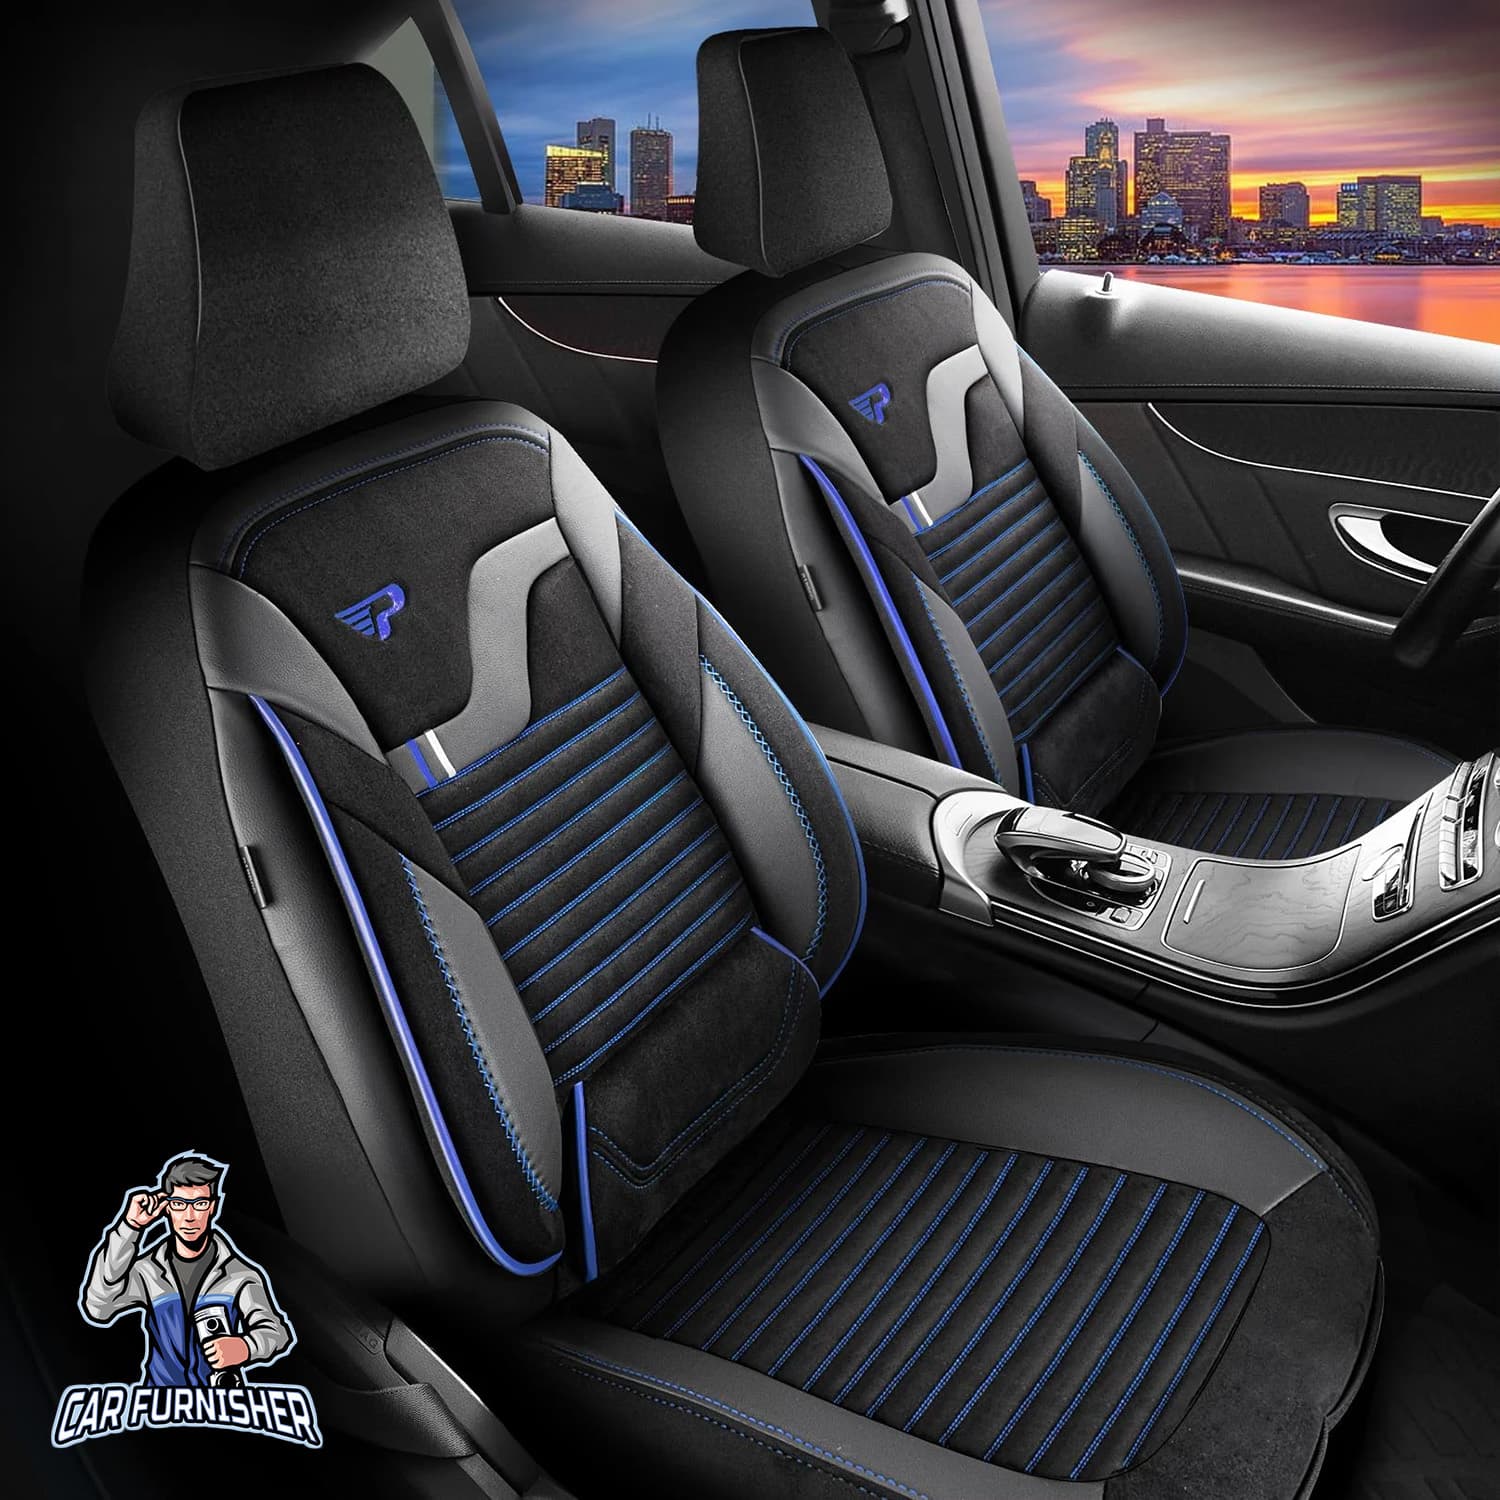 Choosing the Right Ford Seat Covers